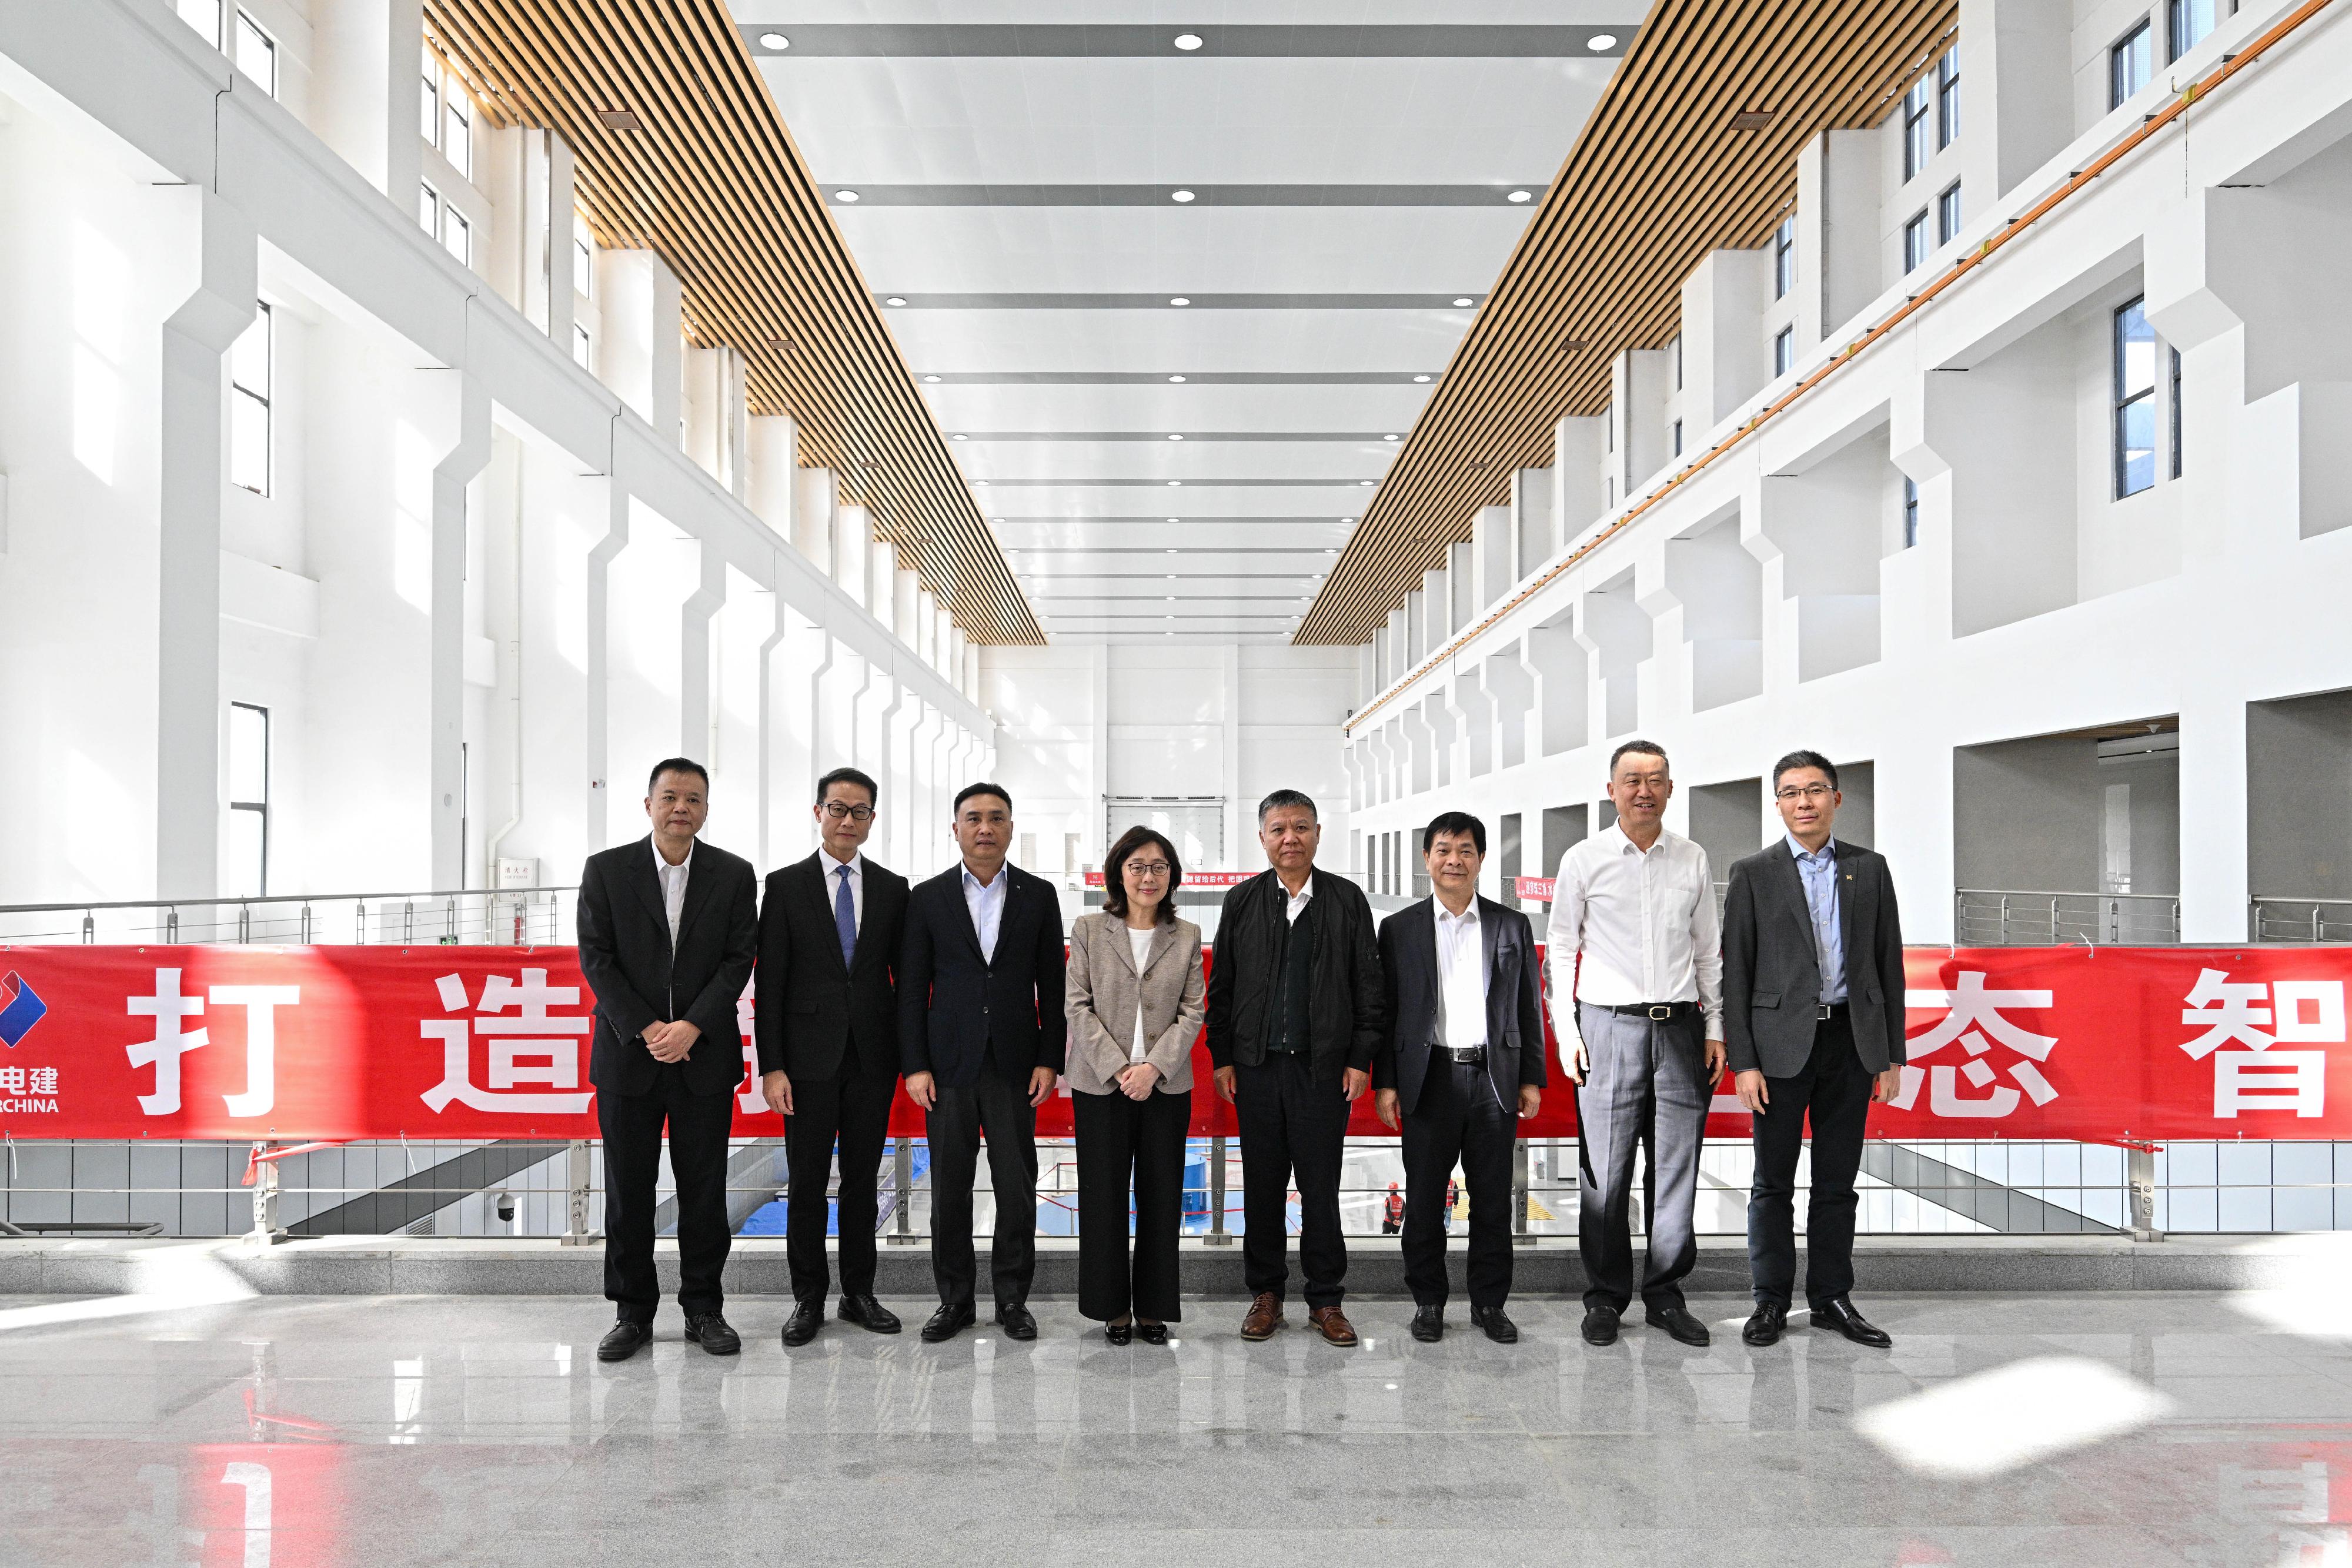 The Secretary for Development, Ms Bernadette Linn, signed a new agreement on the supply of Dongjiang water to Hong Kong from 2024 to 2026 with the Director General of the Water Resources Department of Guangdong Province, Mr Wang Lixin, in Guangzhou today (December 27). Photo shows Ms Linn (fourth left) visiting Goaxinsha Pumping Station in Nansha after the signing ceremony, together with Mr Wang (fourth right), the Director of Water Supplies, Mr Tony Yau (second left), and Guangdong and project representatives.